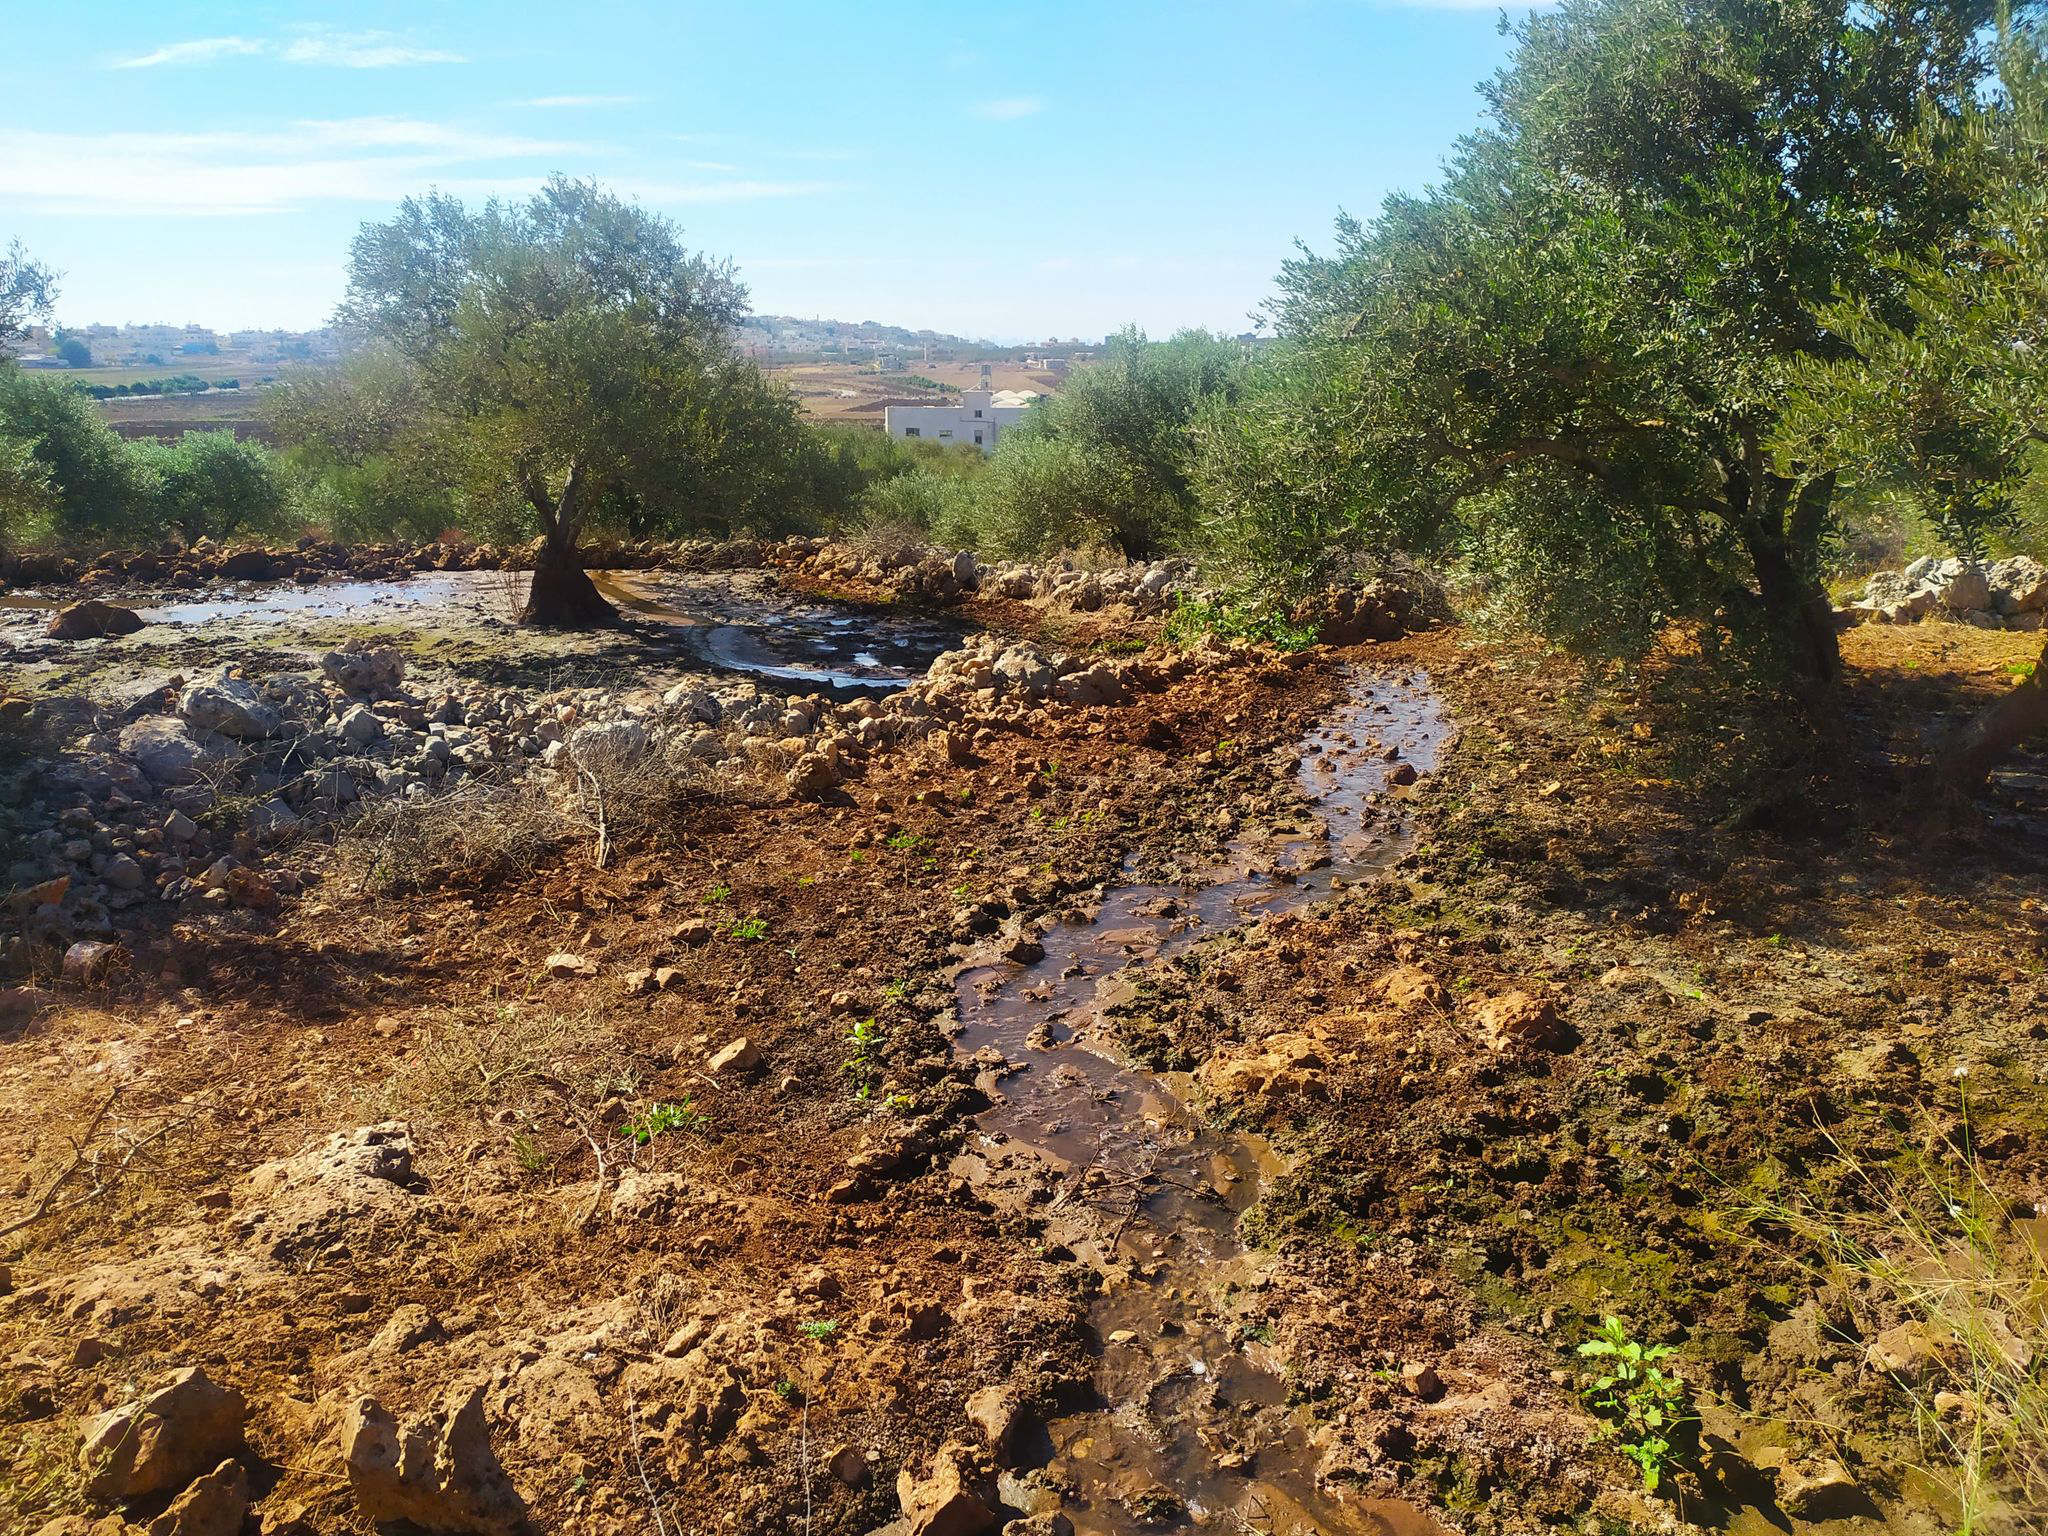 In the village of Deir Ballut, settlers previously attacked the land and cut down 200 olive trees that were about 25 years old (MEE/Shatha Hammad)